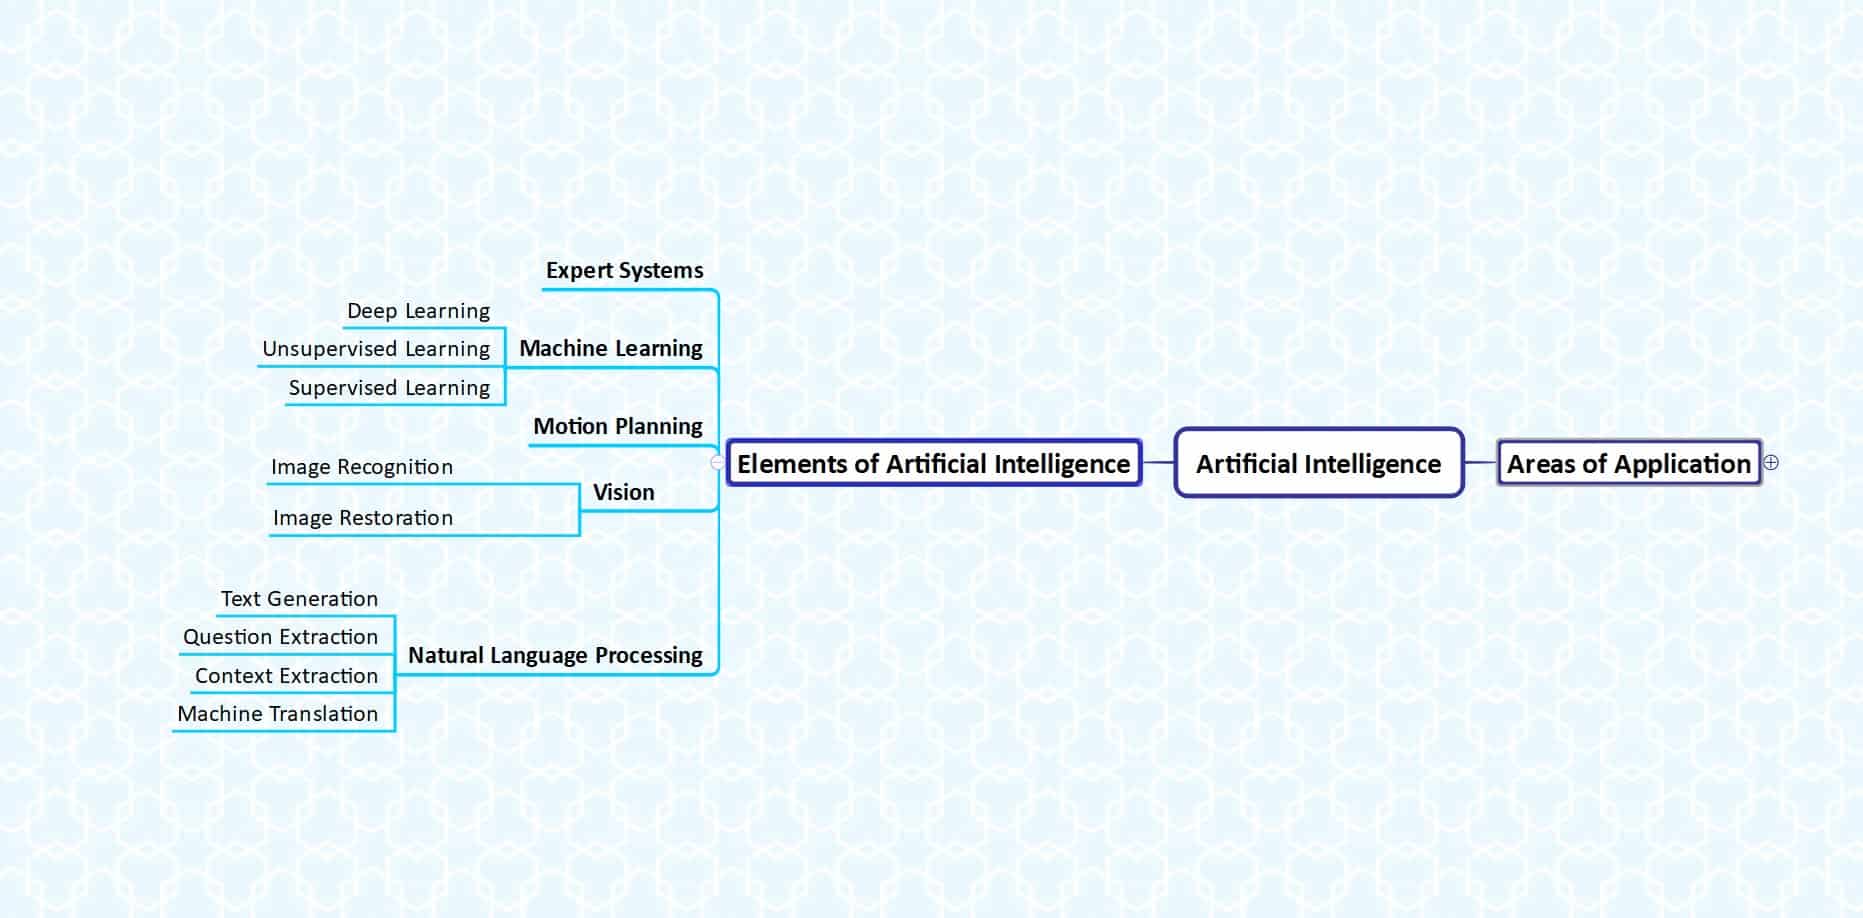 Artificial Intelligence elements